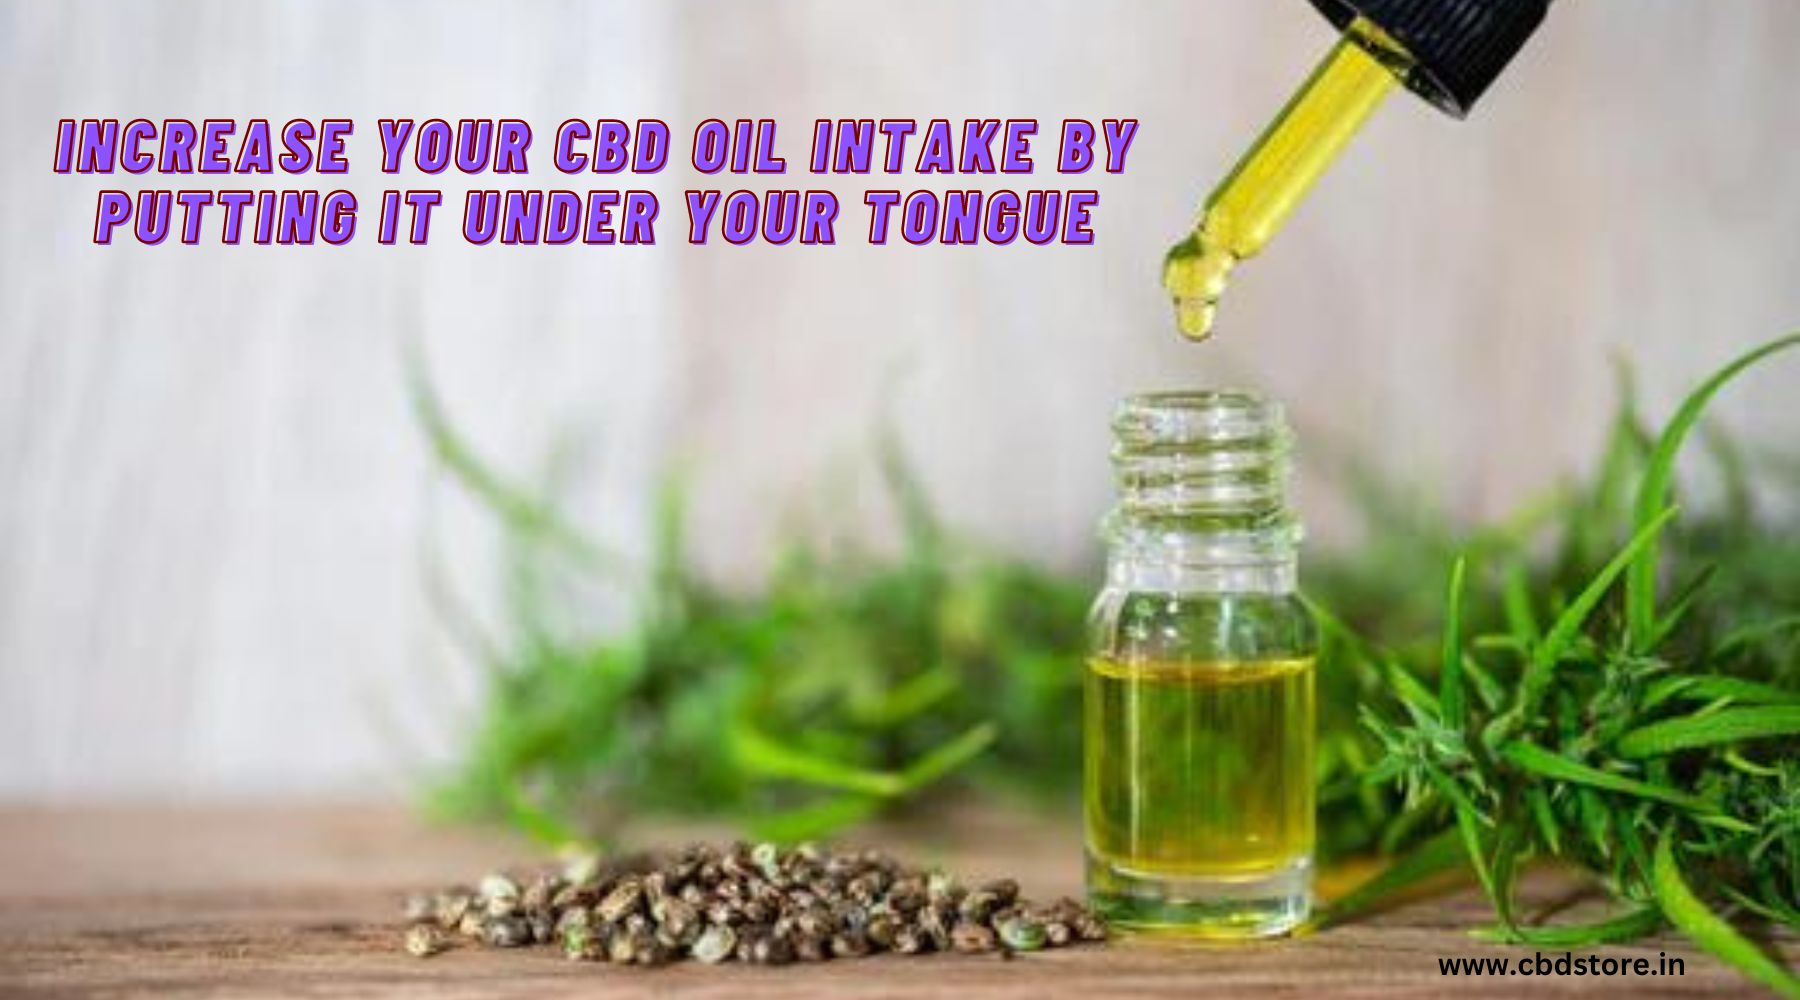 Increase Your CBD Oil Intake By Putting It Under Your Tongue - CBD Store India